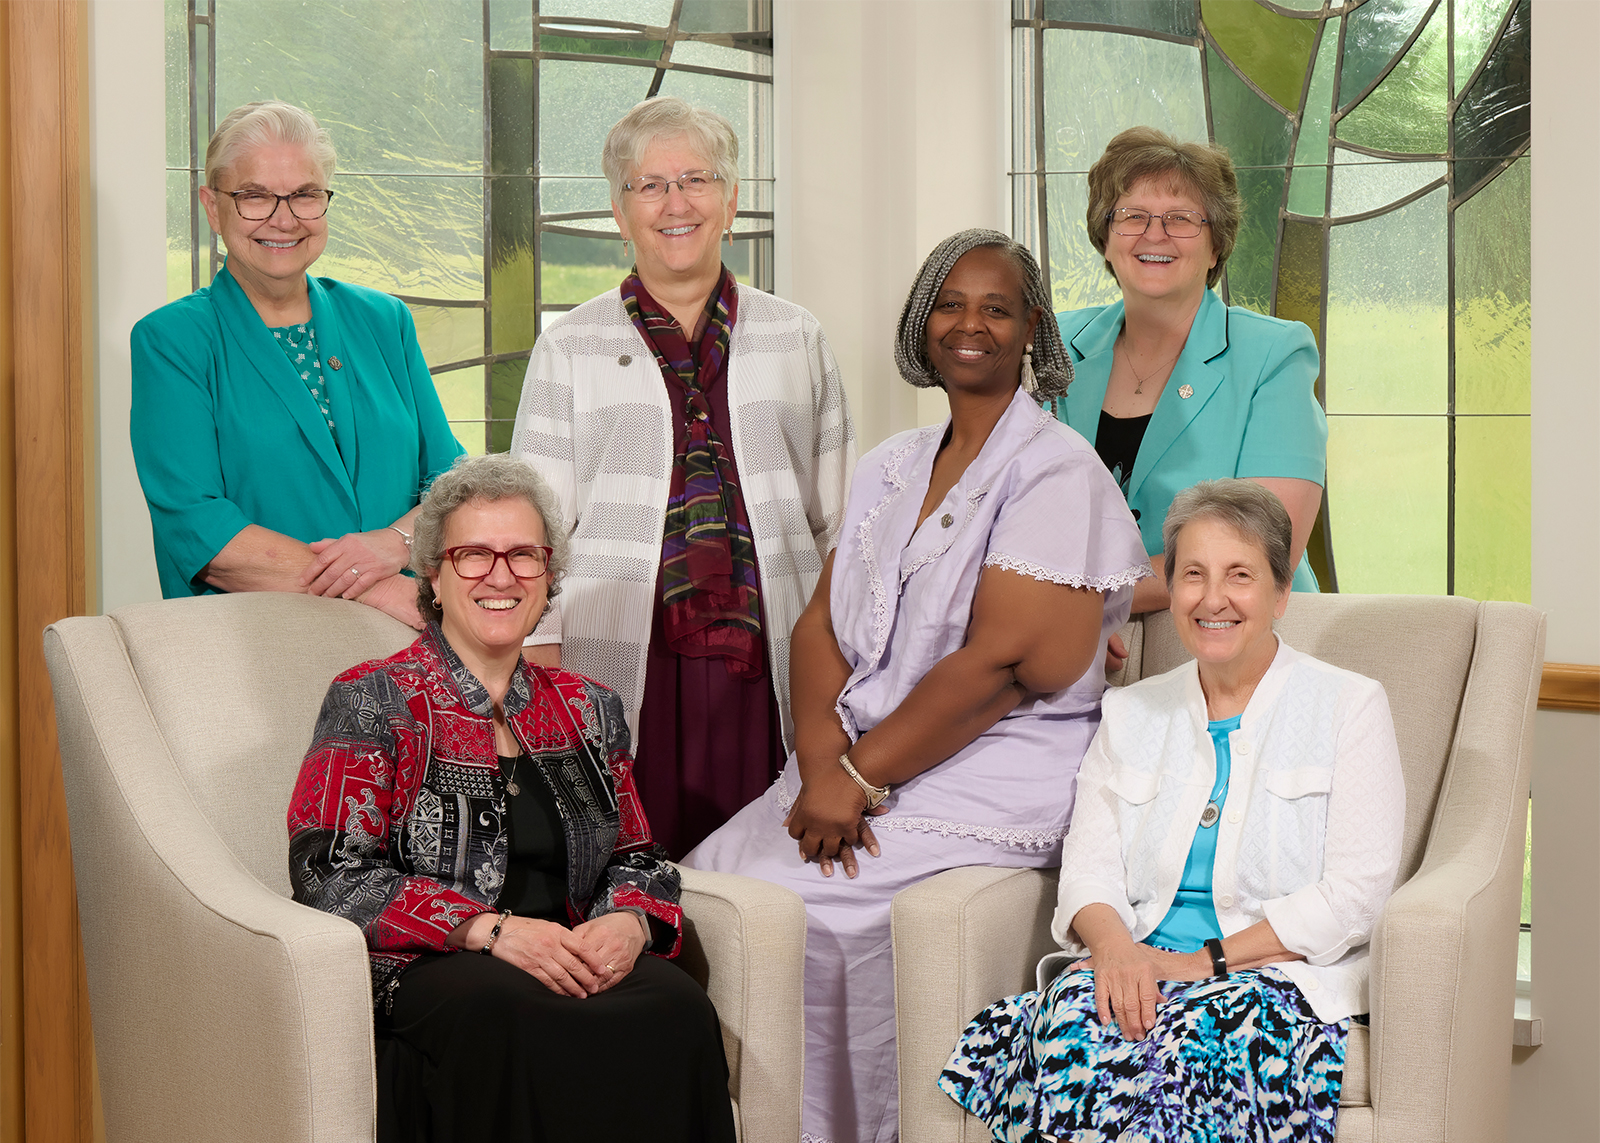 Central Pacific Province Provincial Council 2023-2027. Front Row (L to R): Sisters Debra Marie Sciano (Provincial Leader) and Joan DiProspere (Vicar). Back Row (L to R): Sisters Regina Palacios, Helen Jane Jaeb, Sandra Helton and Mary Kay Brooks